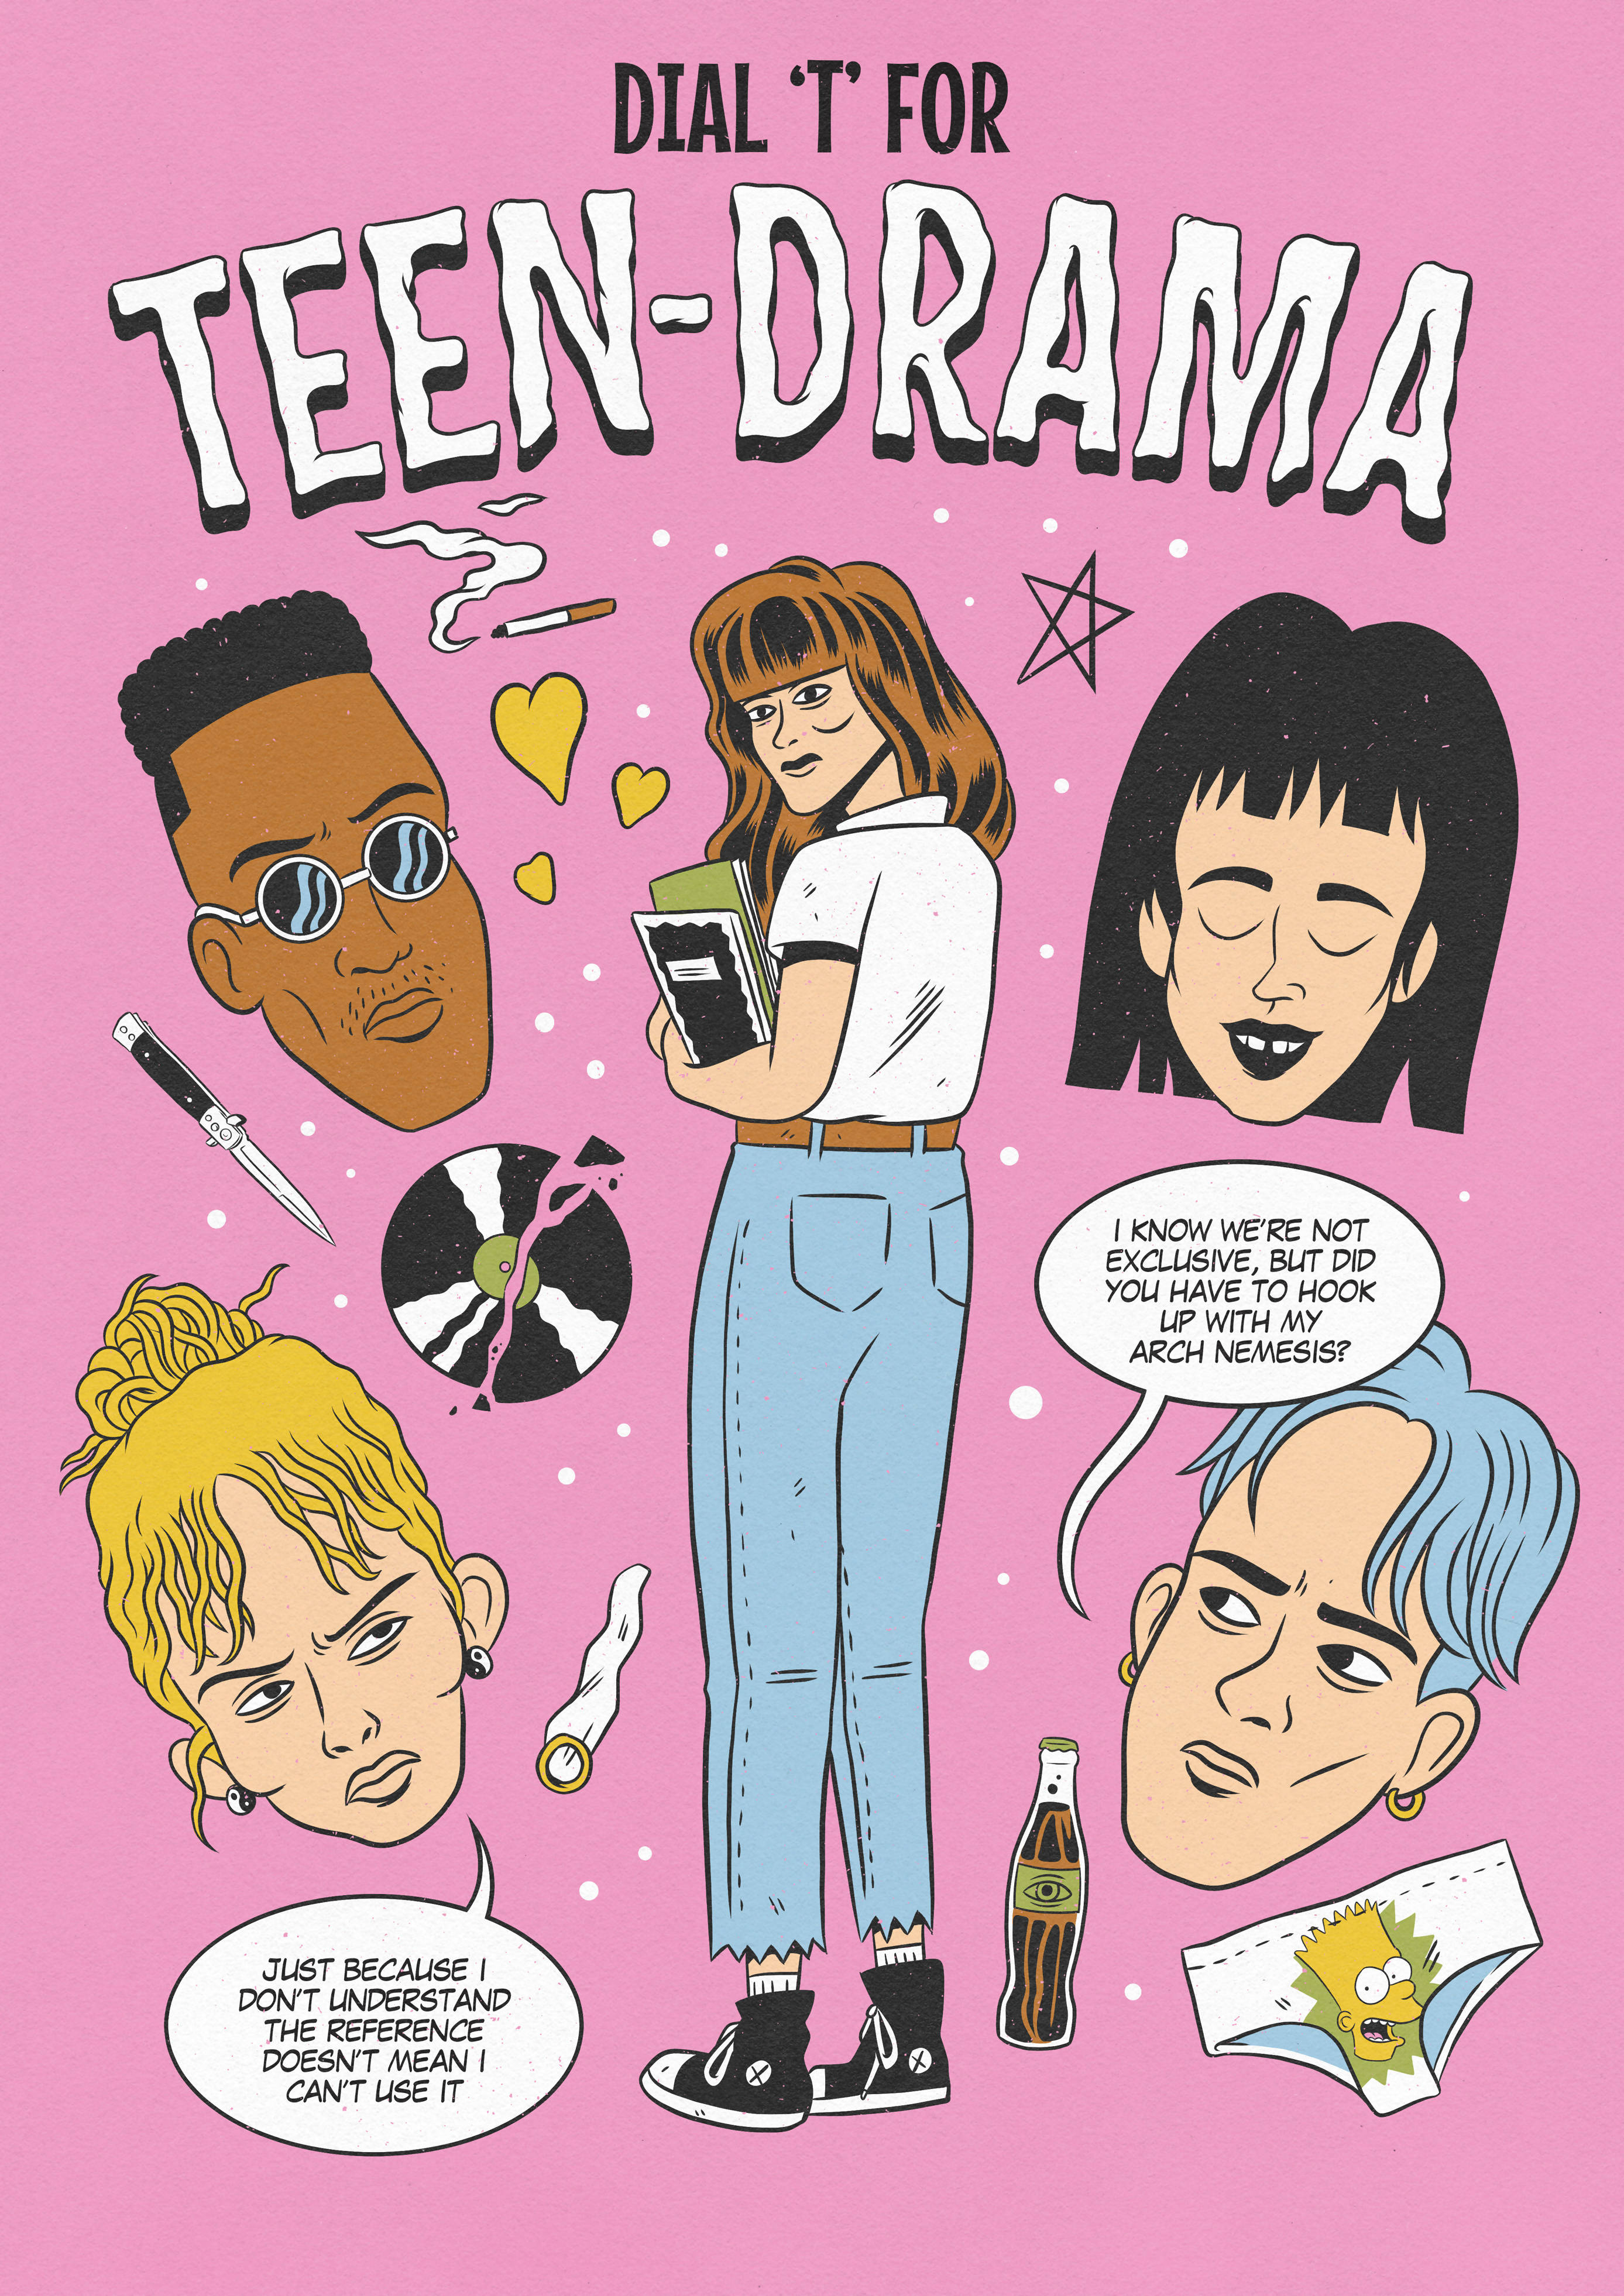 dial "t" for teen drama